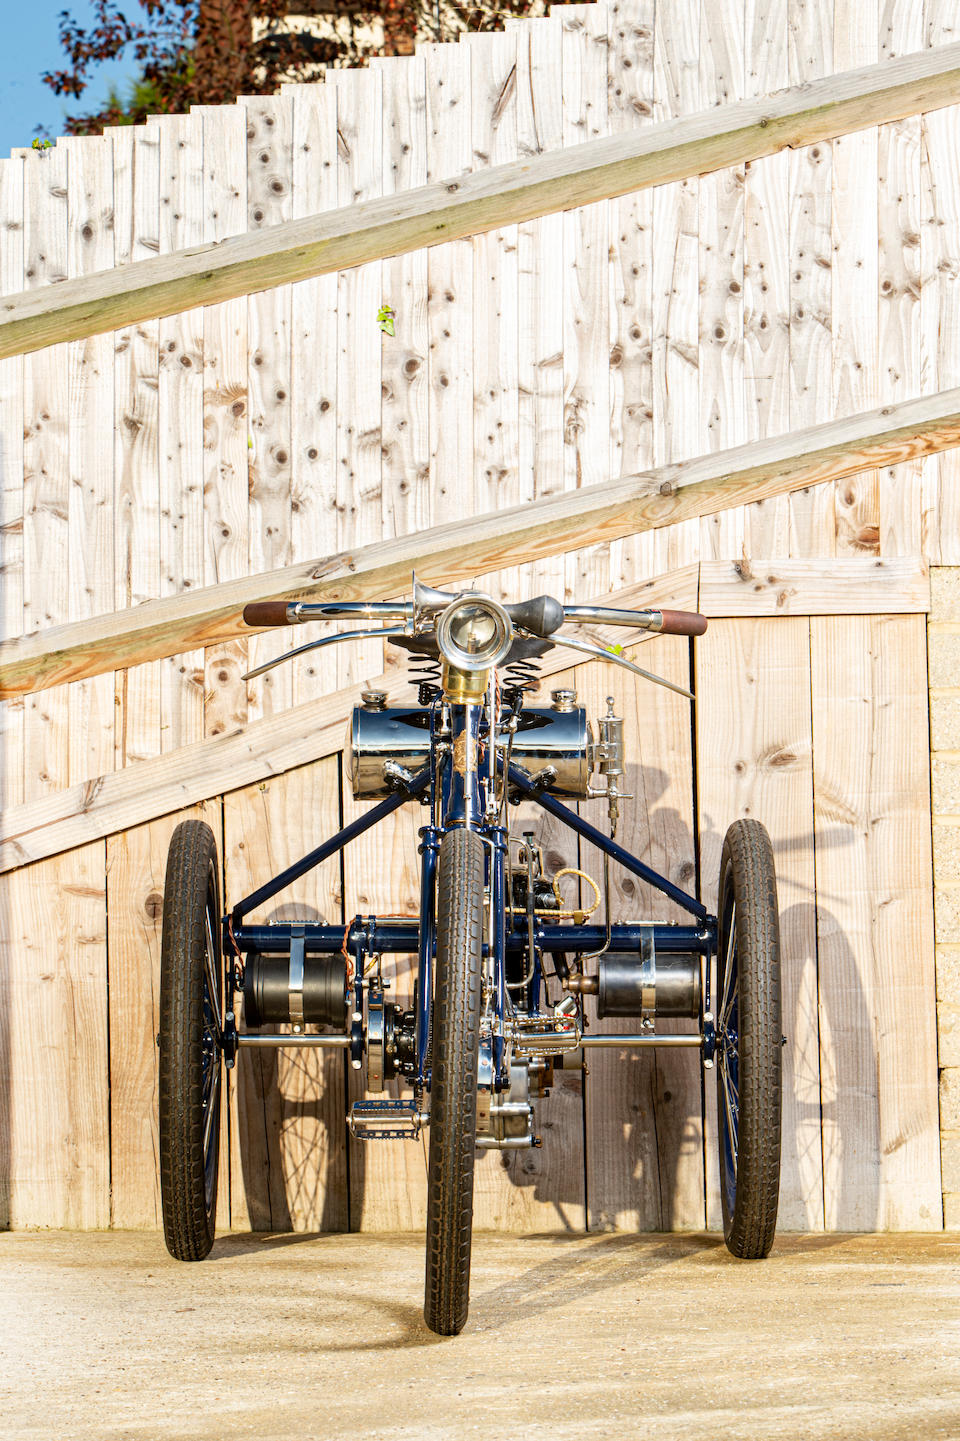 1899 Peugeot 2&#188;hp Tricycle  Chassis no. 290